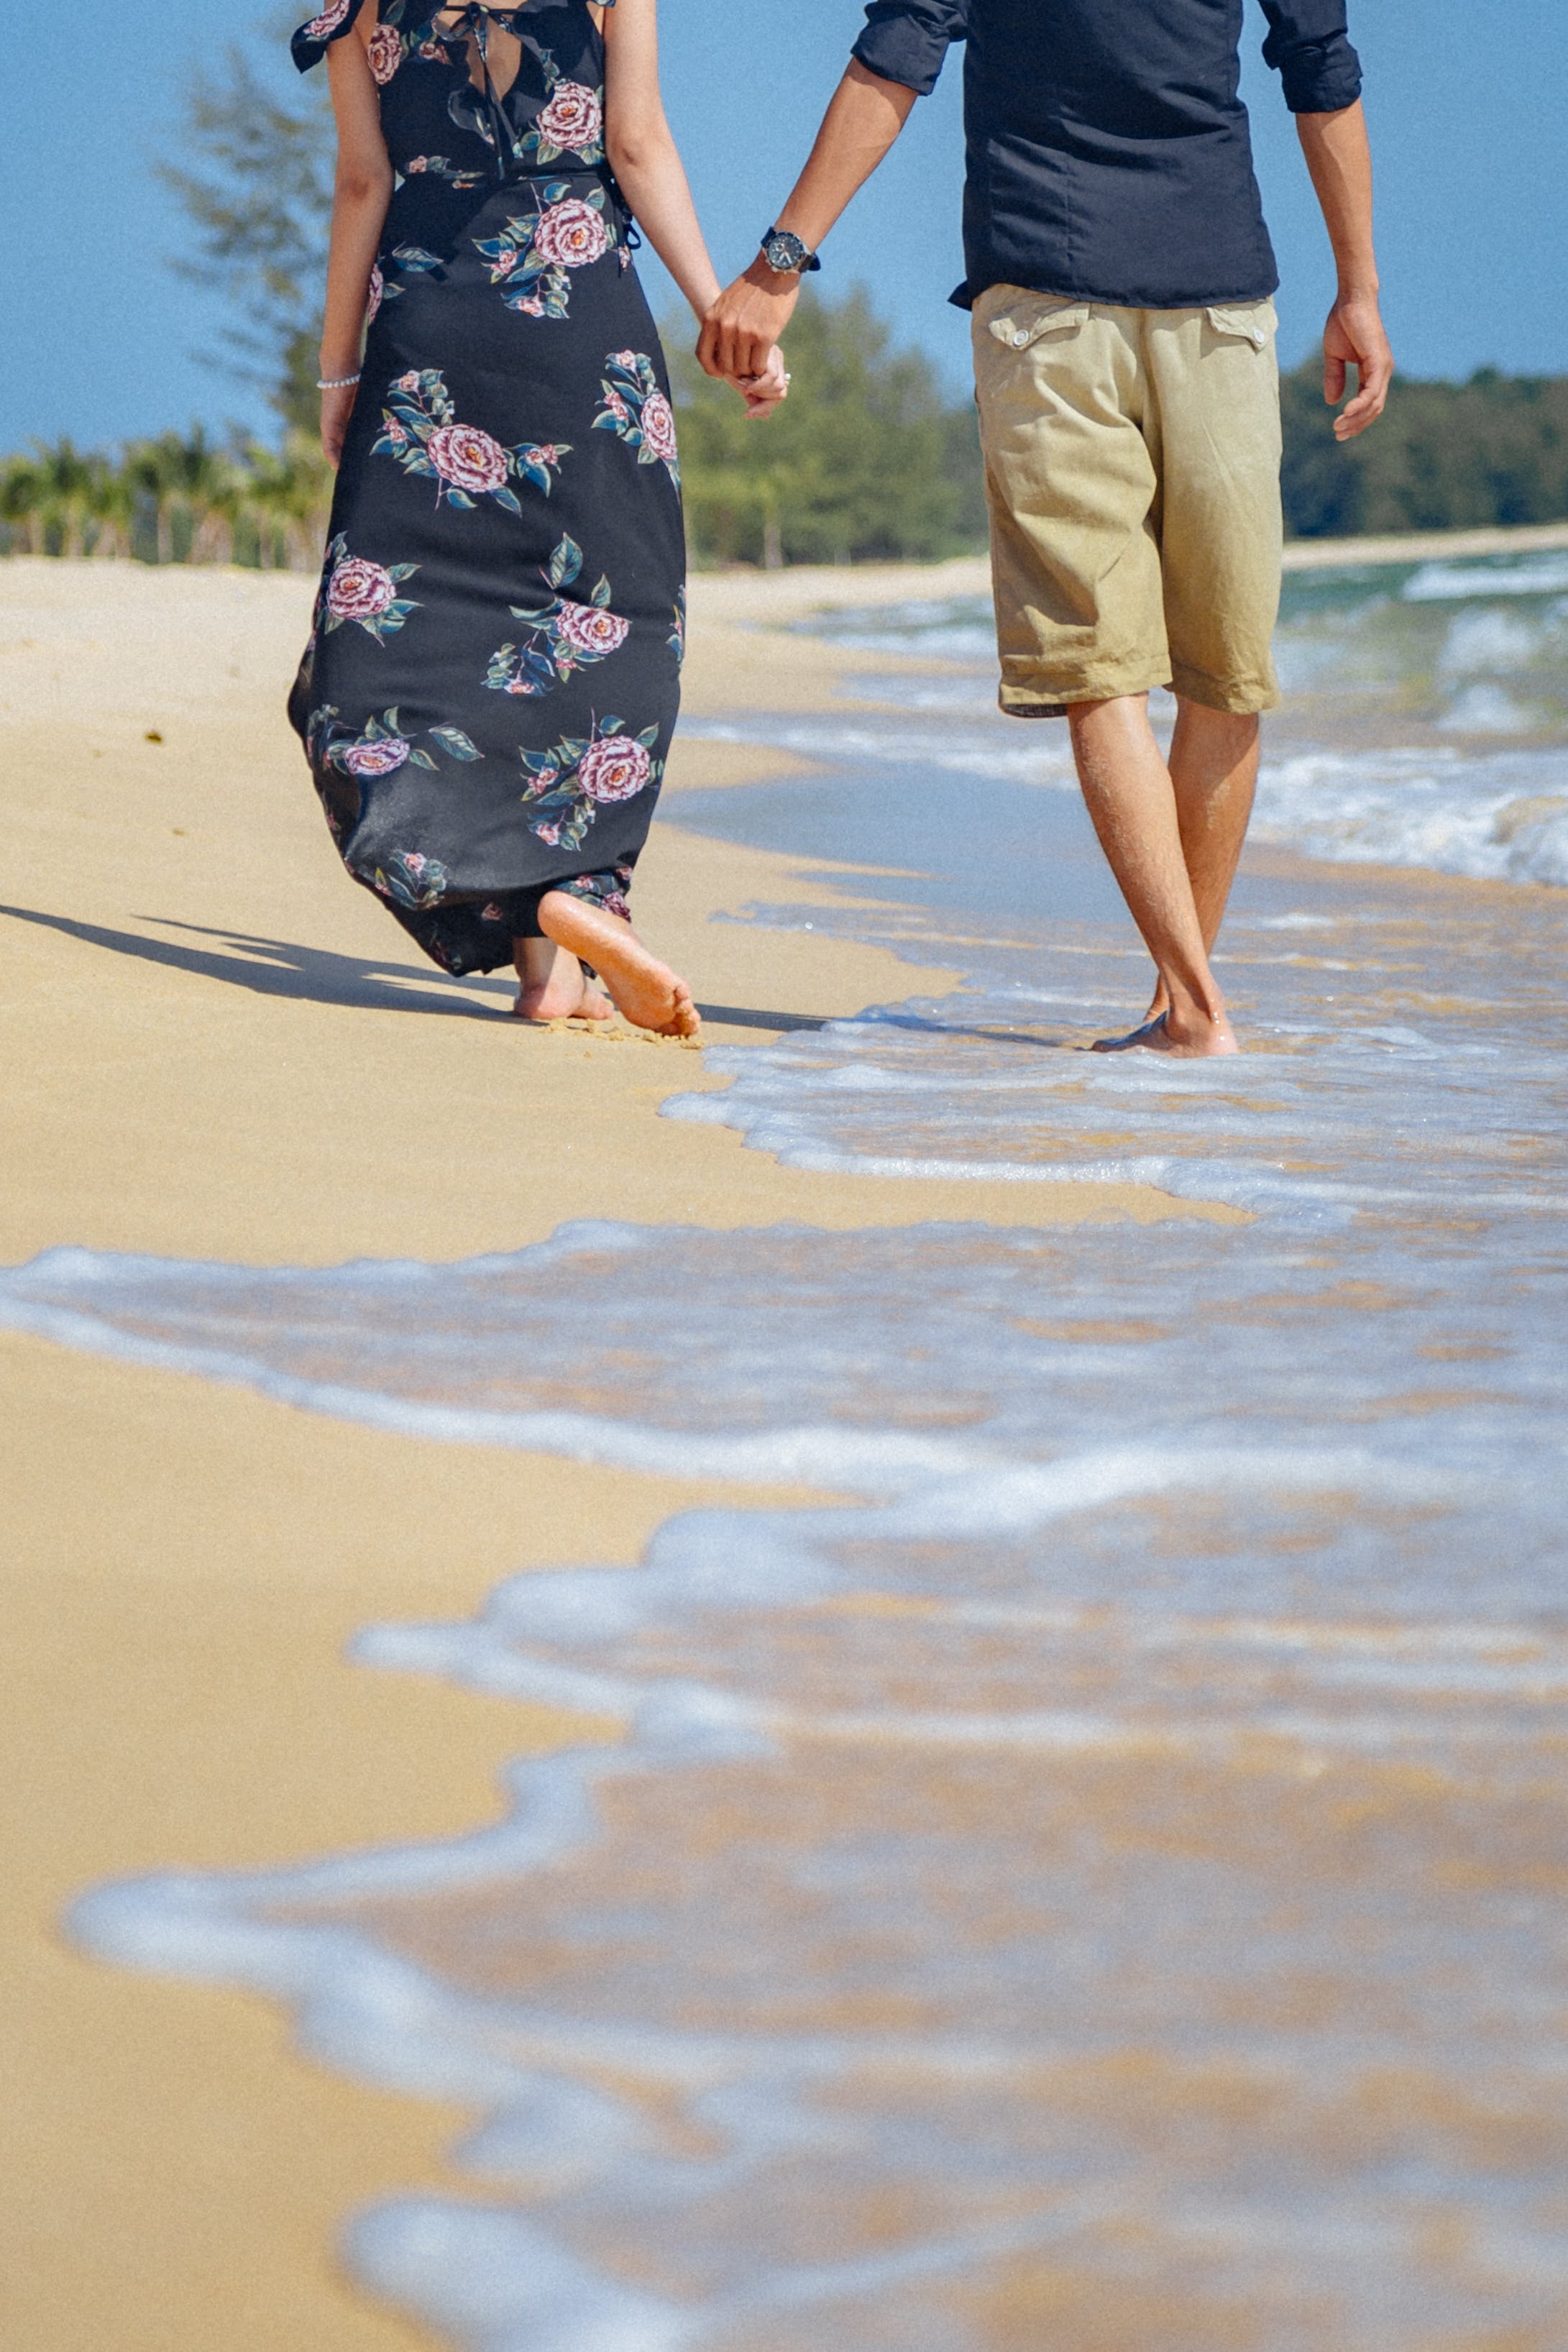 A couple holding hands while strolling on the beach. | Source: Pexels